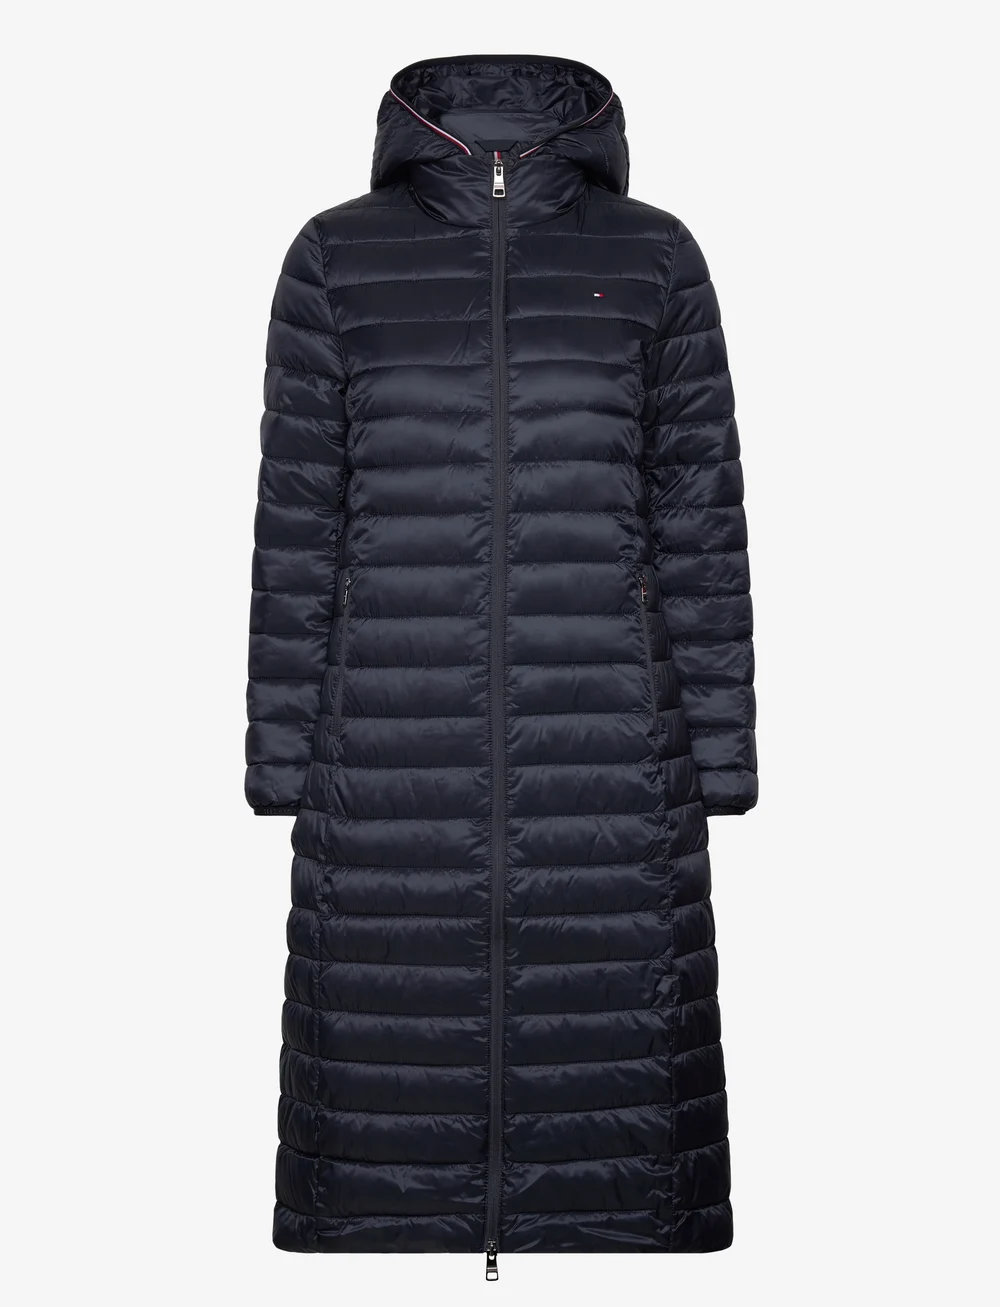 Tommy Hilfiger Lw Padded Global Stripe Coat - 149.94 €. Buy Padded Coats  from Tommy Hilfiger online at . Fast delivery and easy returns